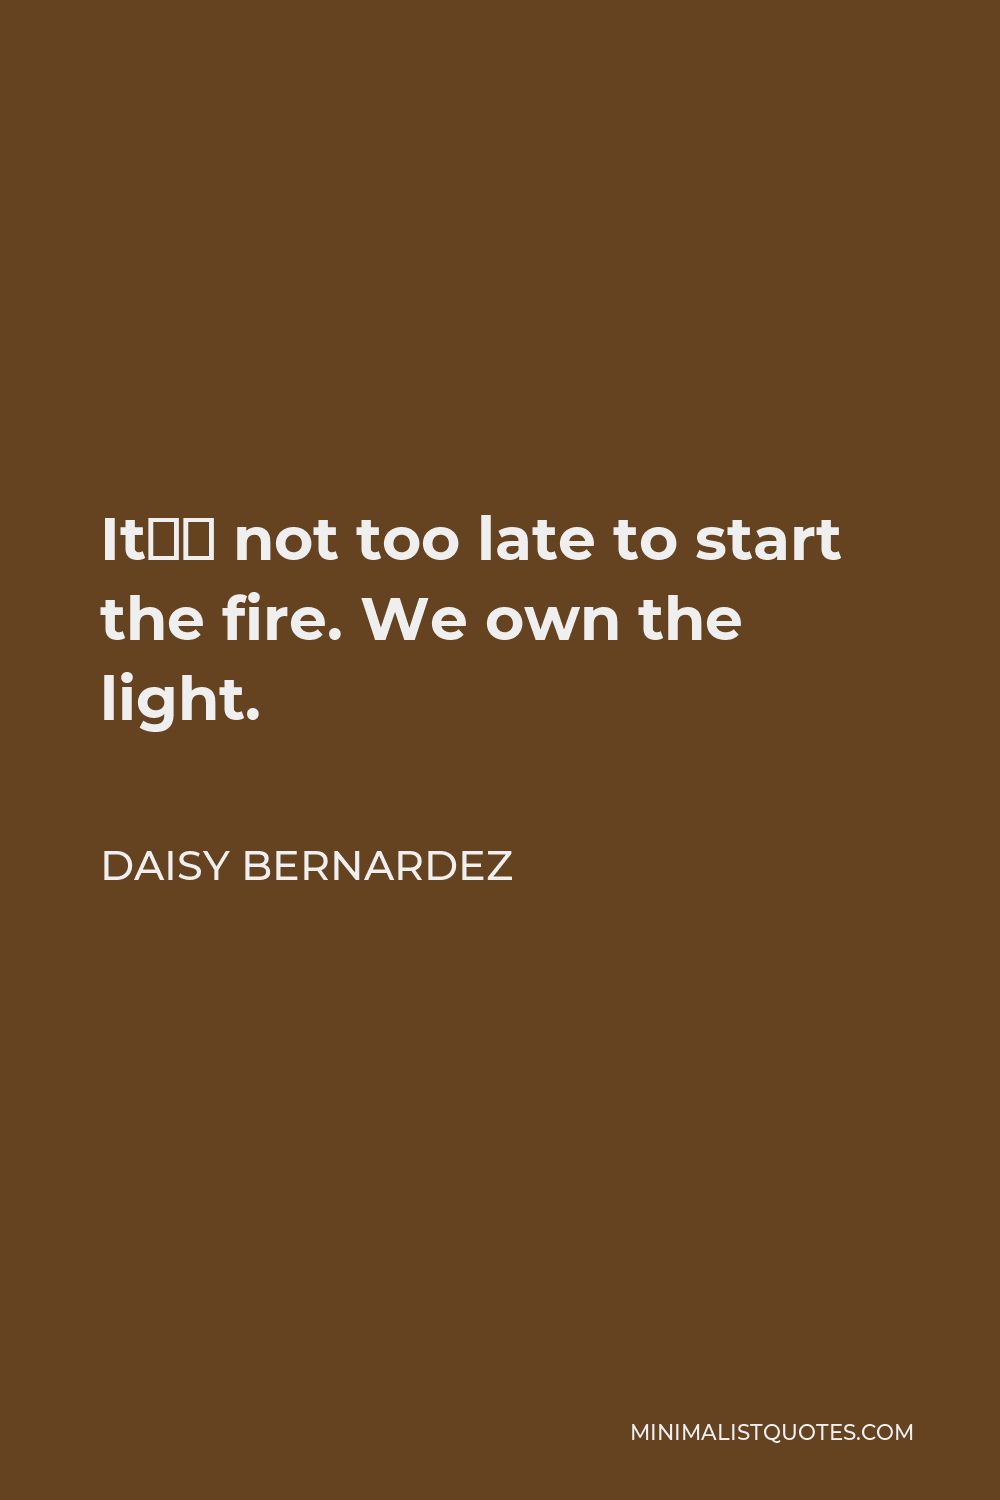 Daisy Bernardez Quote - It’s not too late to start the fire. We own the light.